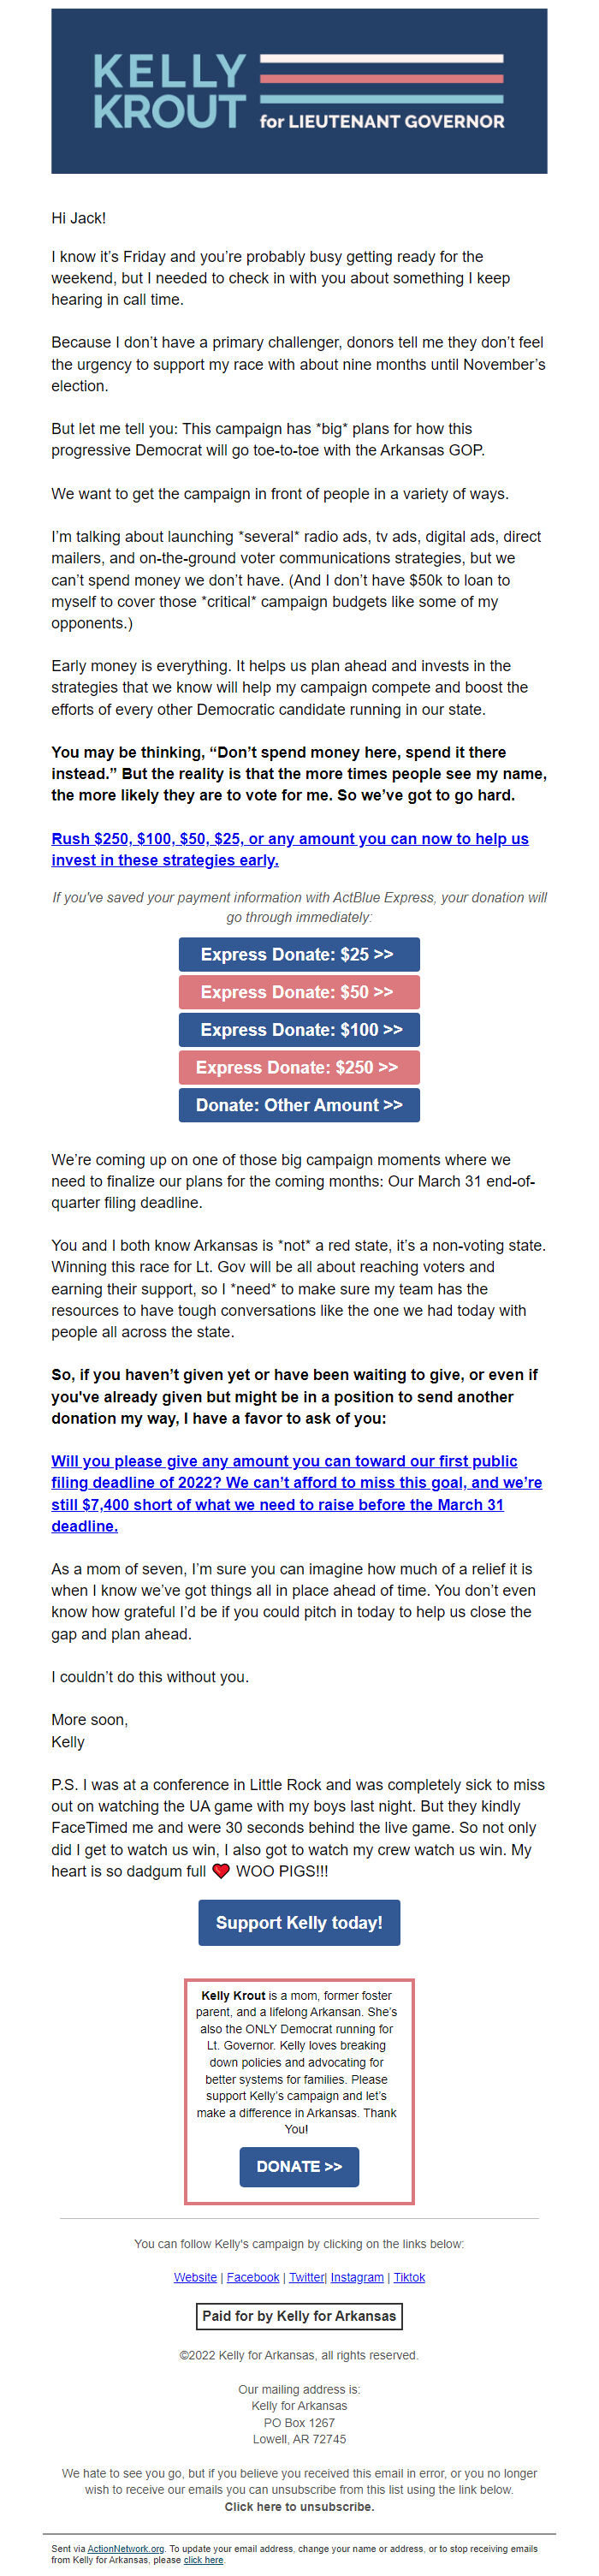 Screenshot of the email generated on import